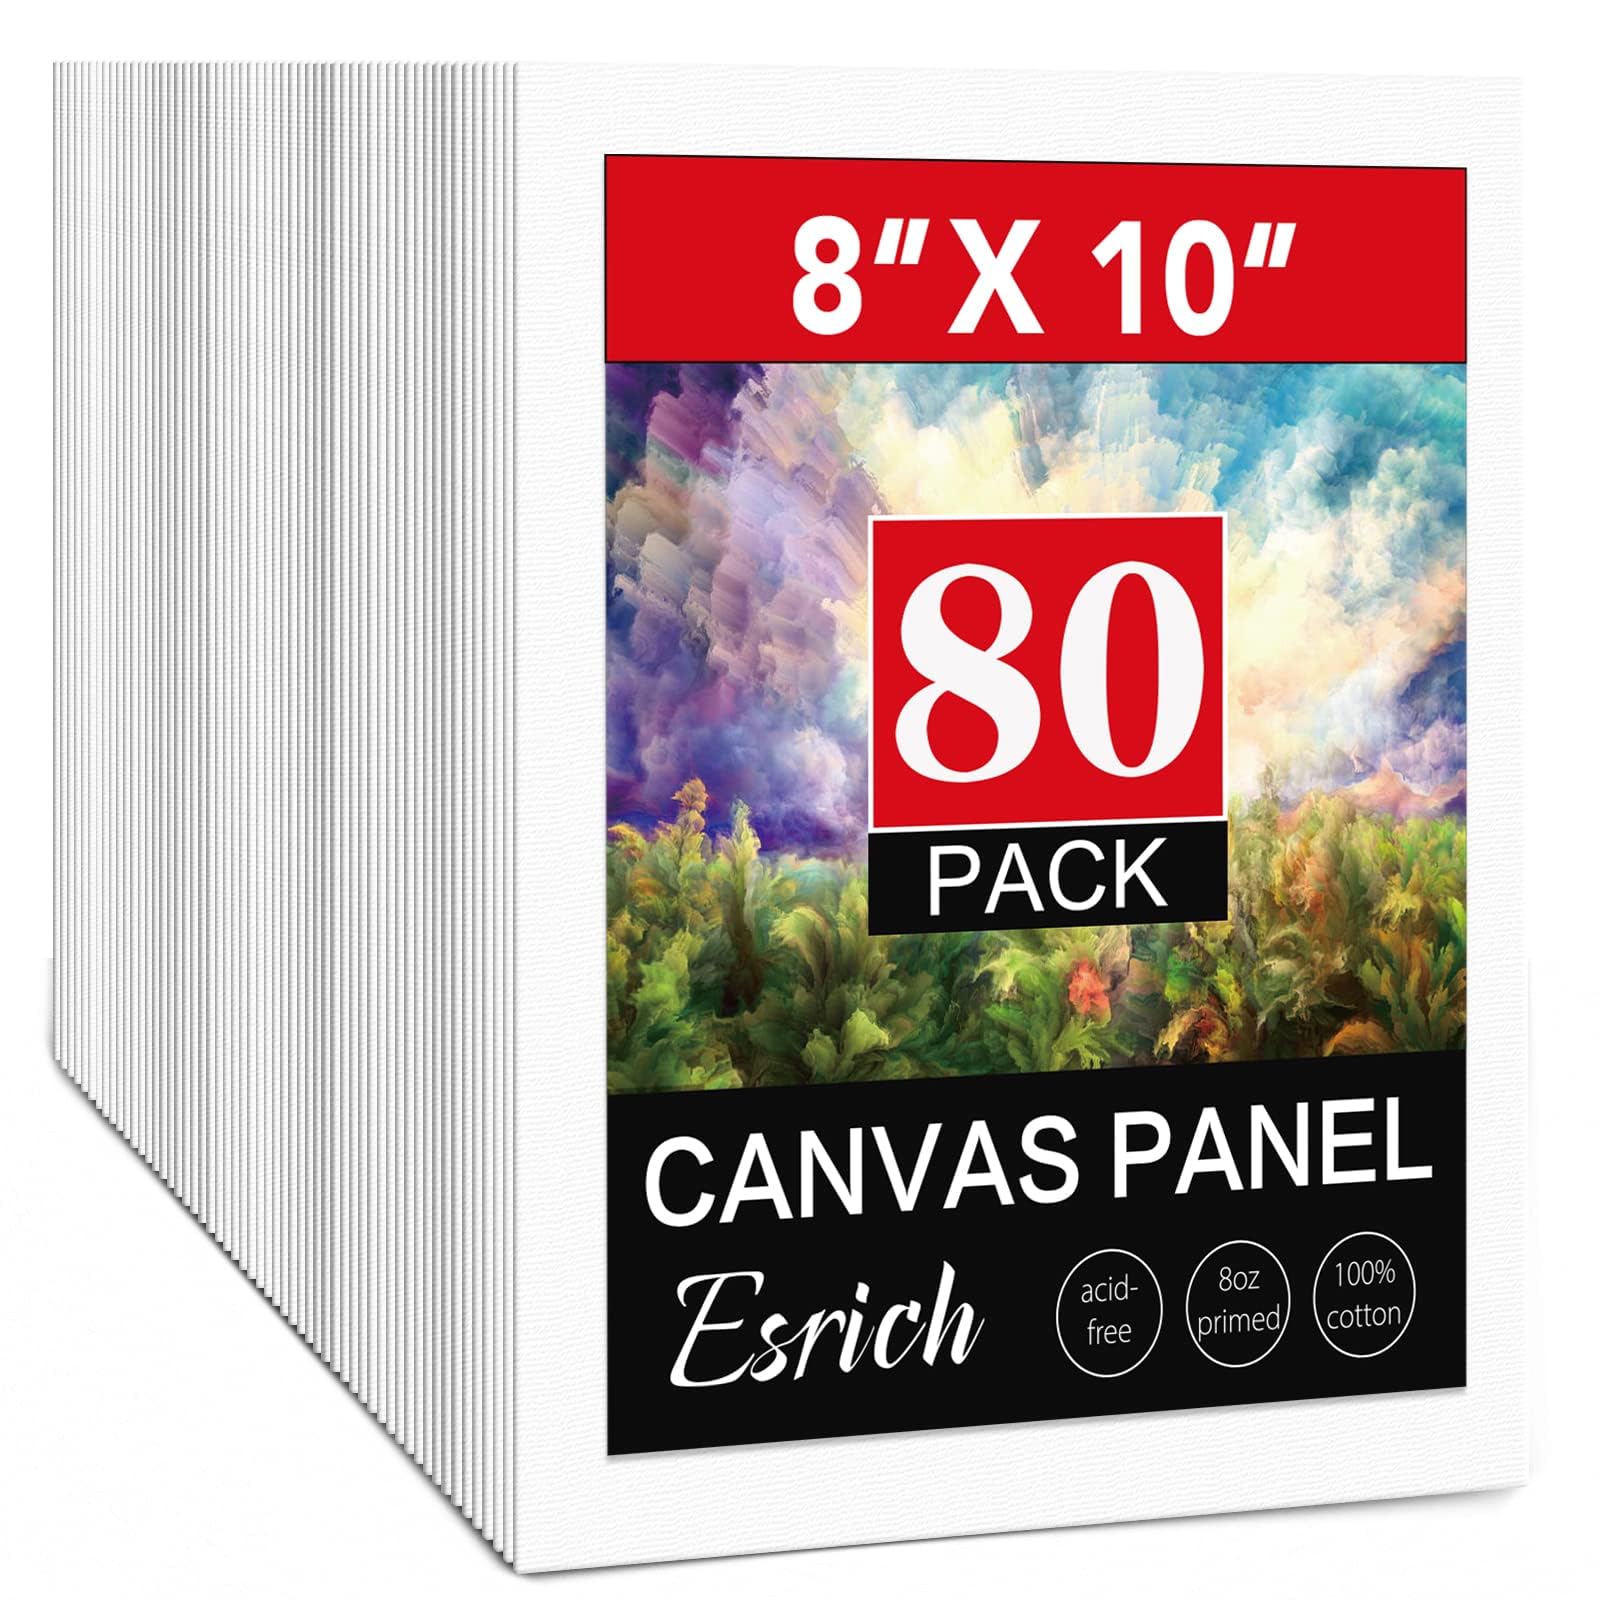 ESRICH Canvas Boards for Painting 8x10, 80 Pack Painting Canvas, Primed 100% Cotton Canvas Panels 8x10 for Oil Paint, Watercolor, Acrylic Paint, Gouache and Tempera.